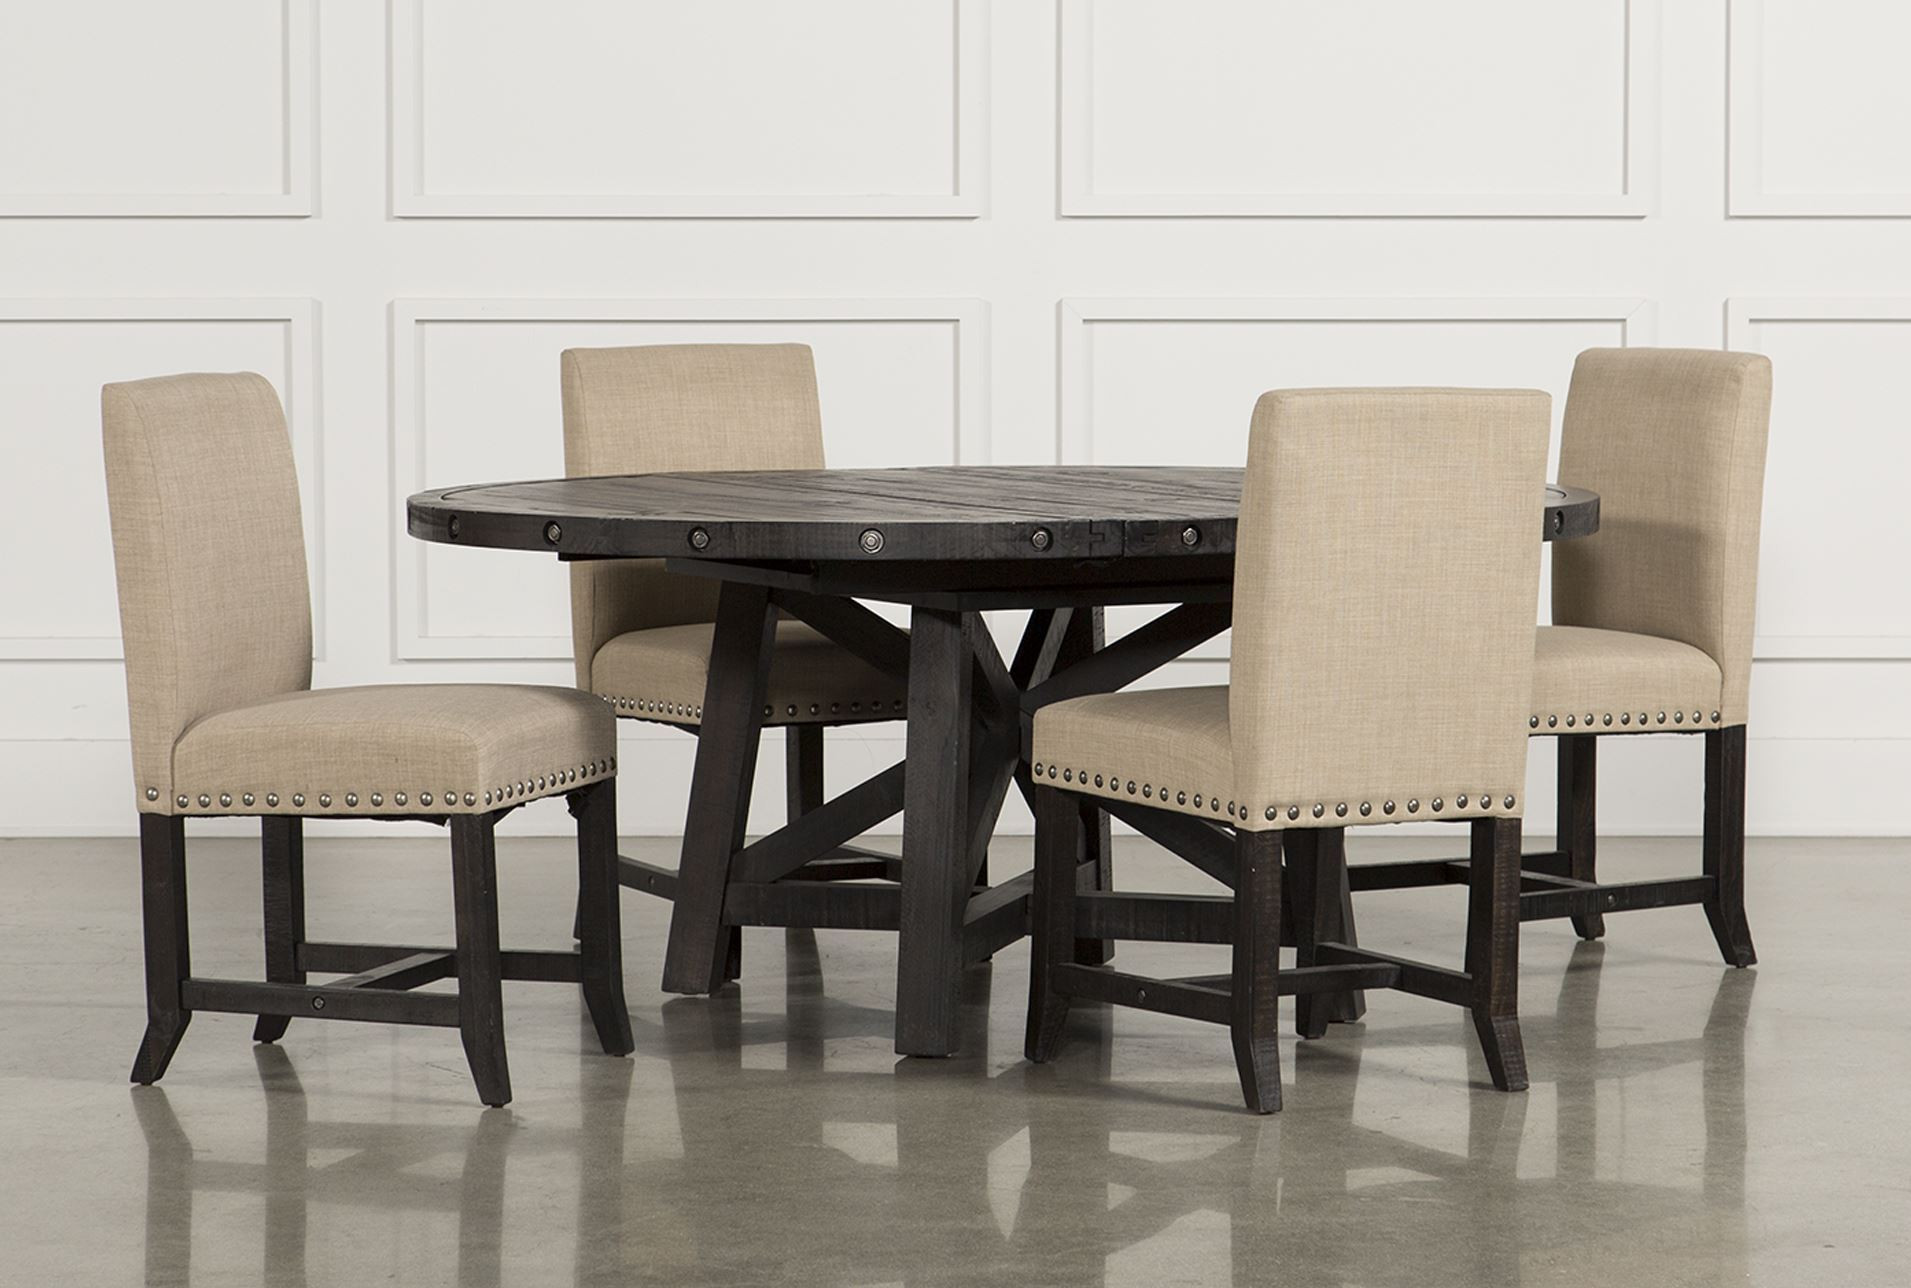 Living Spaces Dining Table Set
 Jaxon 5 Piece Round Dining Set W Upholstered Chairs